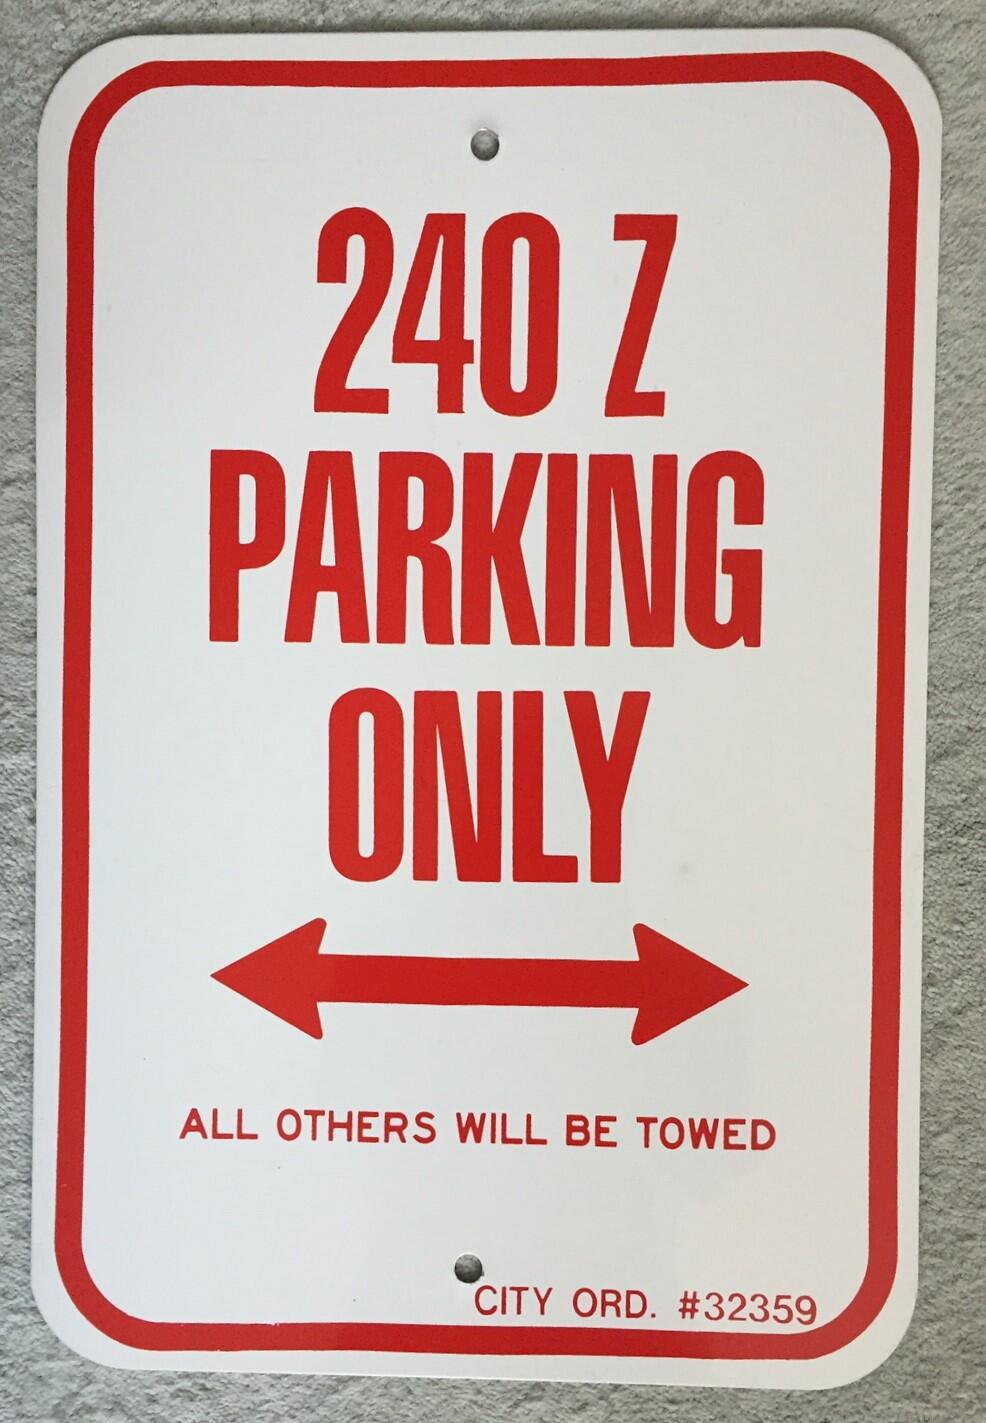 Sign: "240Z PARKING ONLY"